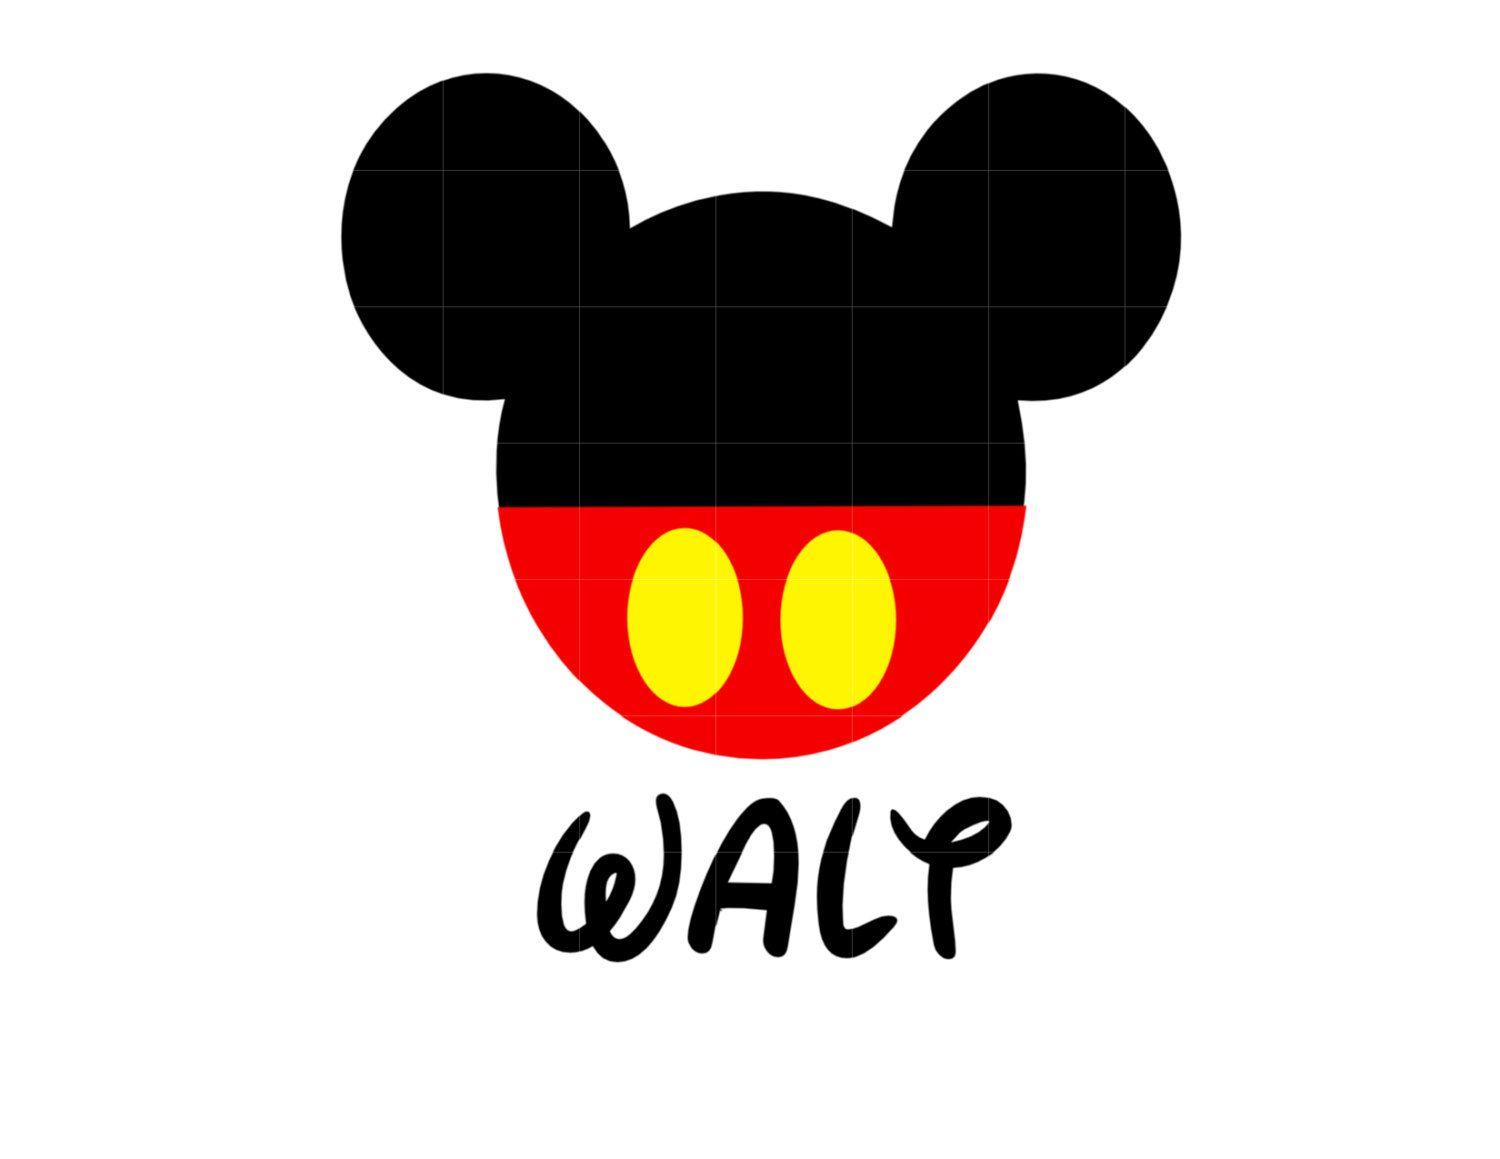 Mikey Name Logo - Free Mickey Mouse Logo, Download Free Clip Art, Free Clip Art on ...